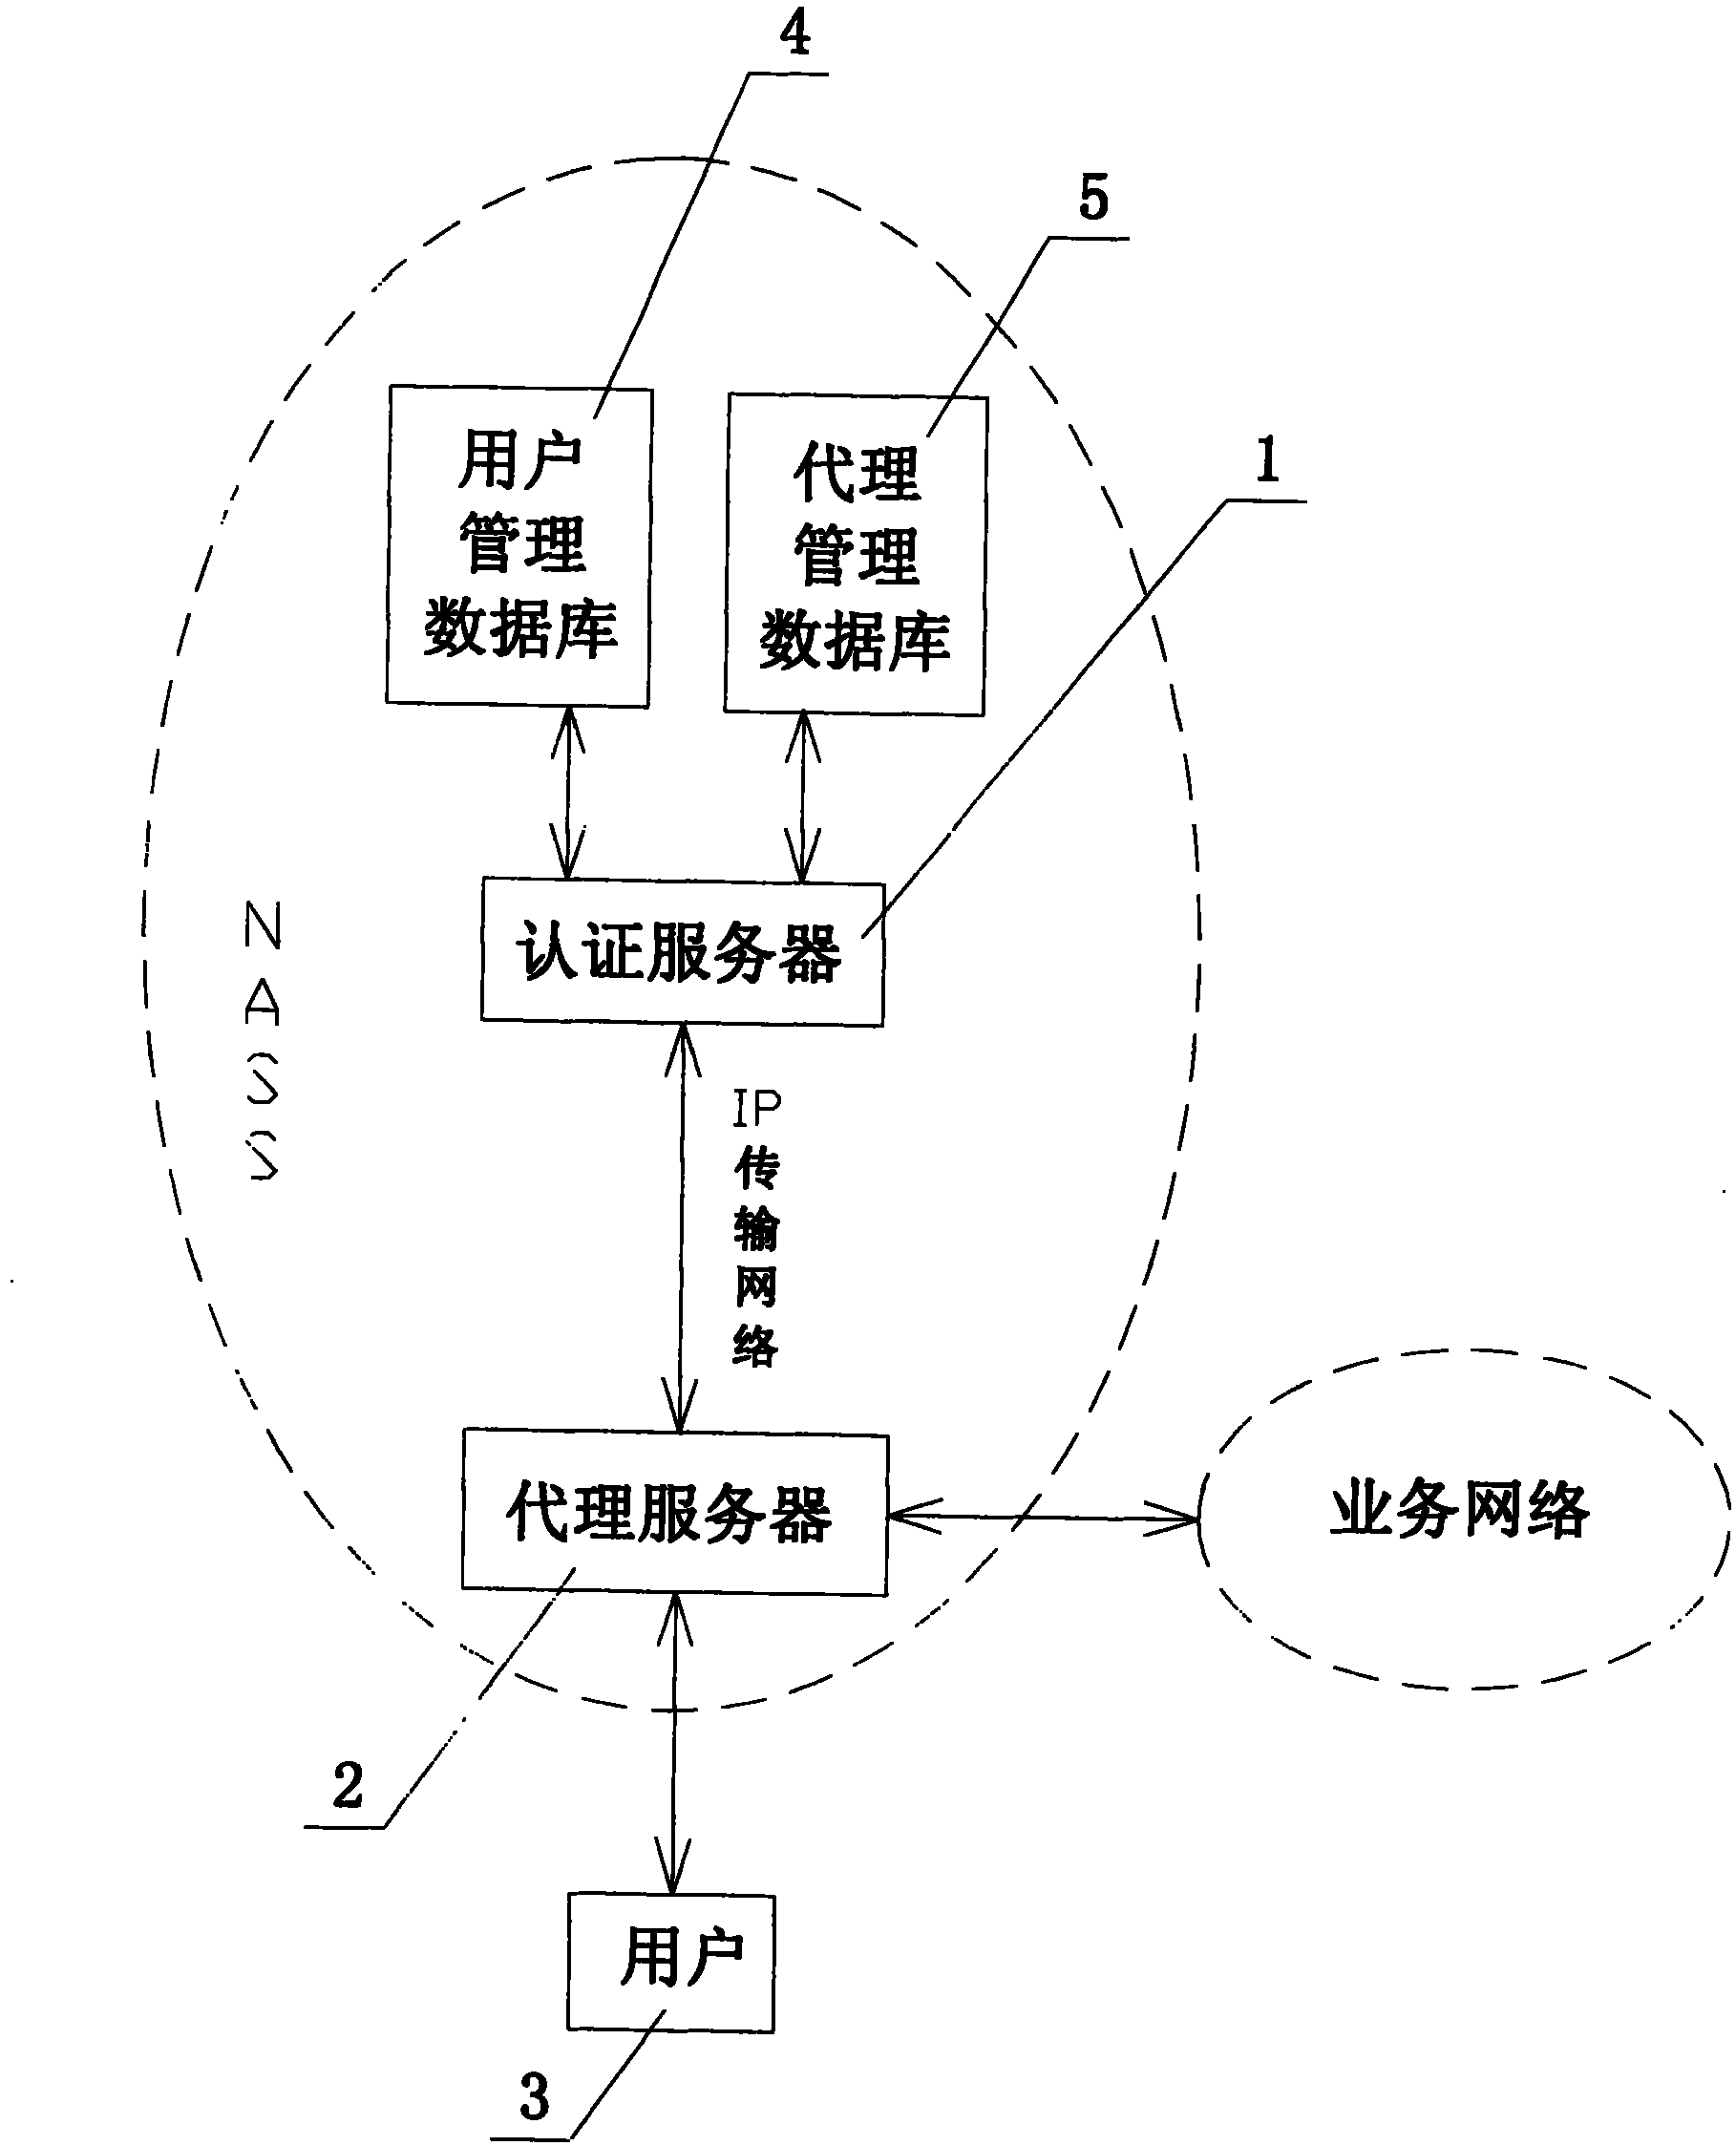 User management method and system for next-generation network